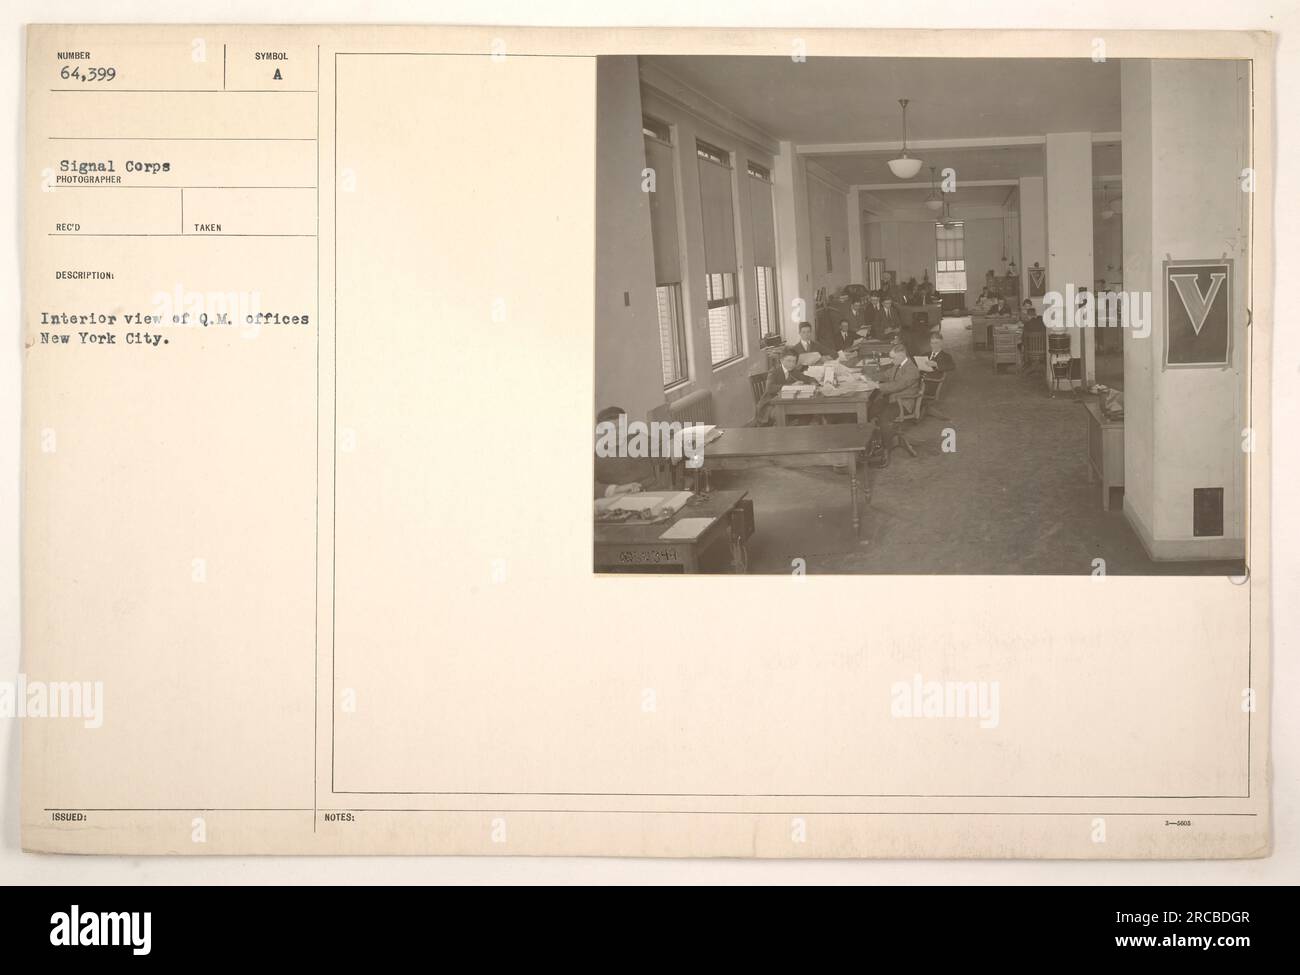 Photograph shows the interior view of the Q.M. (Quartermaster) offices in New York City. The photo was taken by an unidentified photographer for the Signal Corps and has been assigned the number 64,399. The image does not contain any additional significant information. Stock Photo